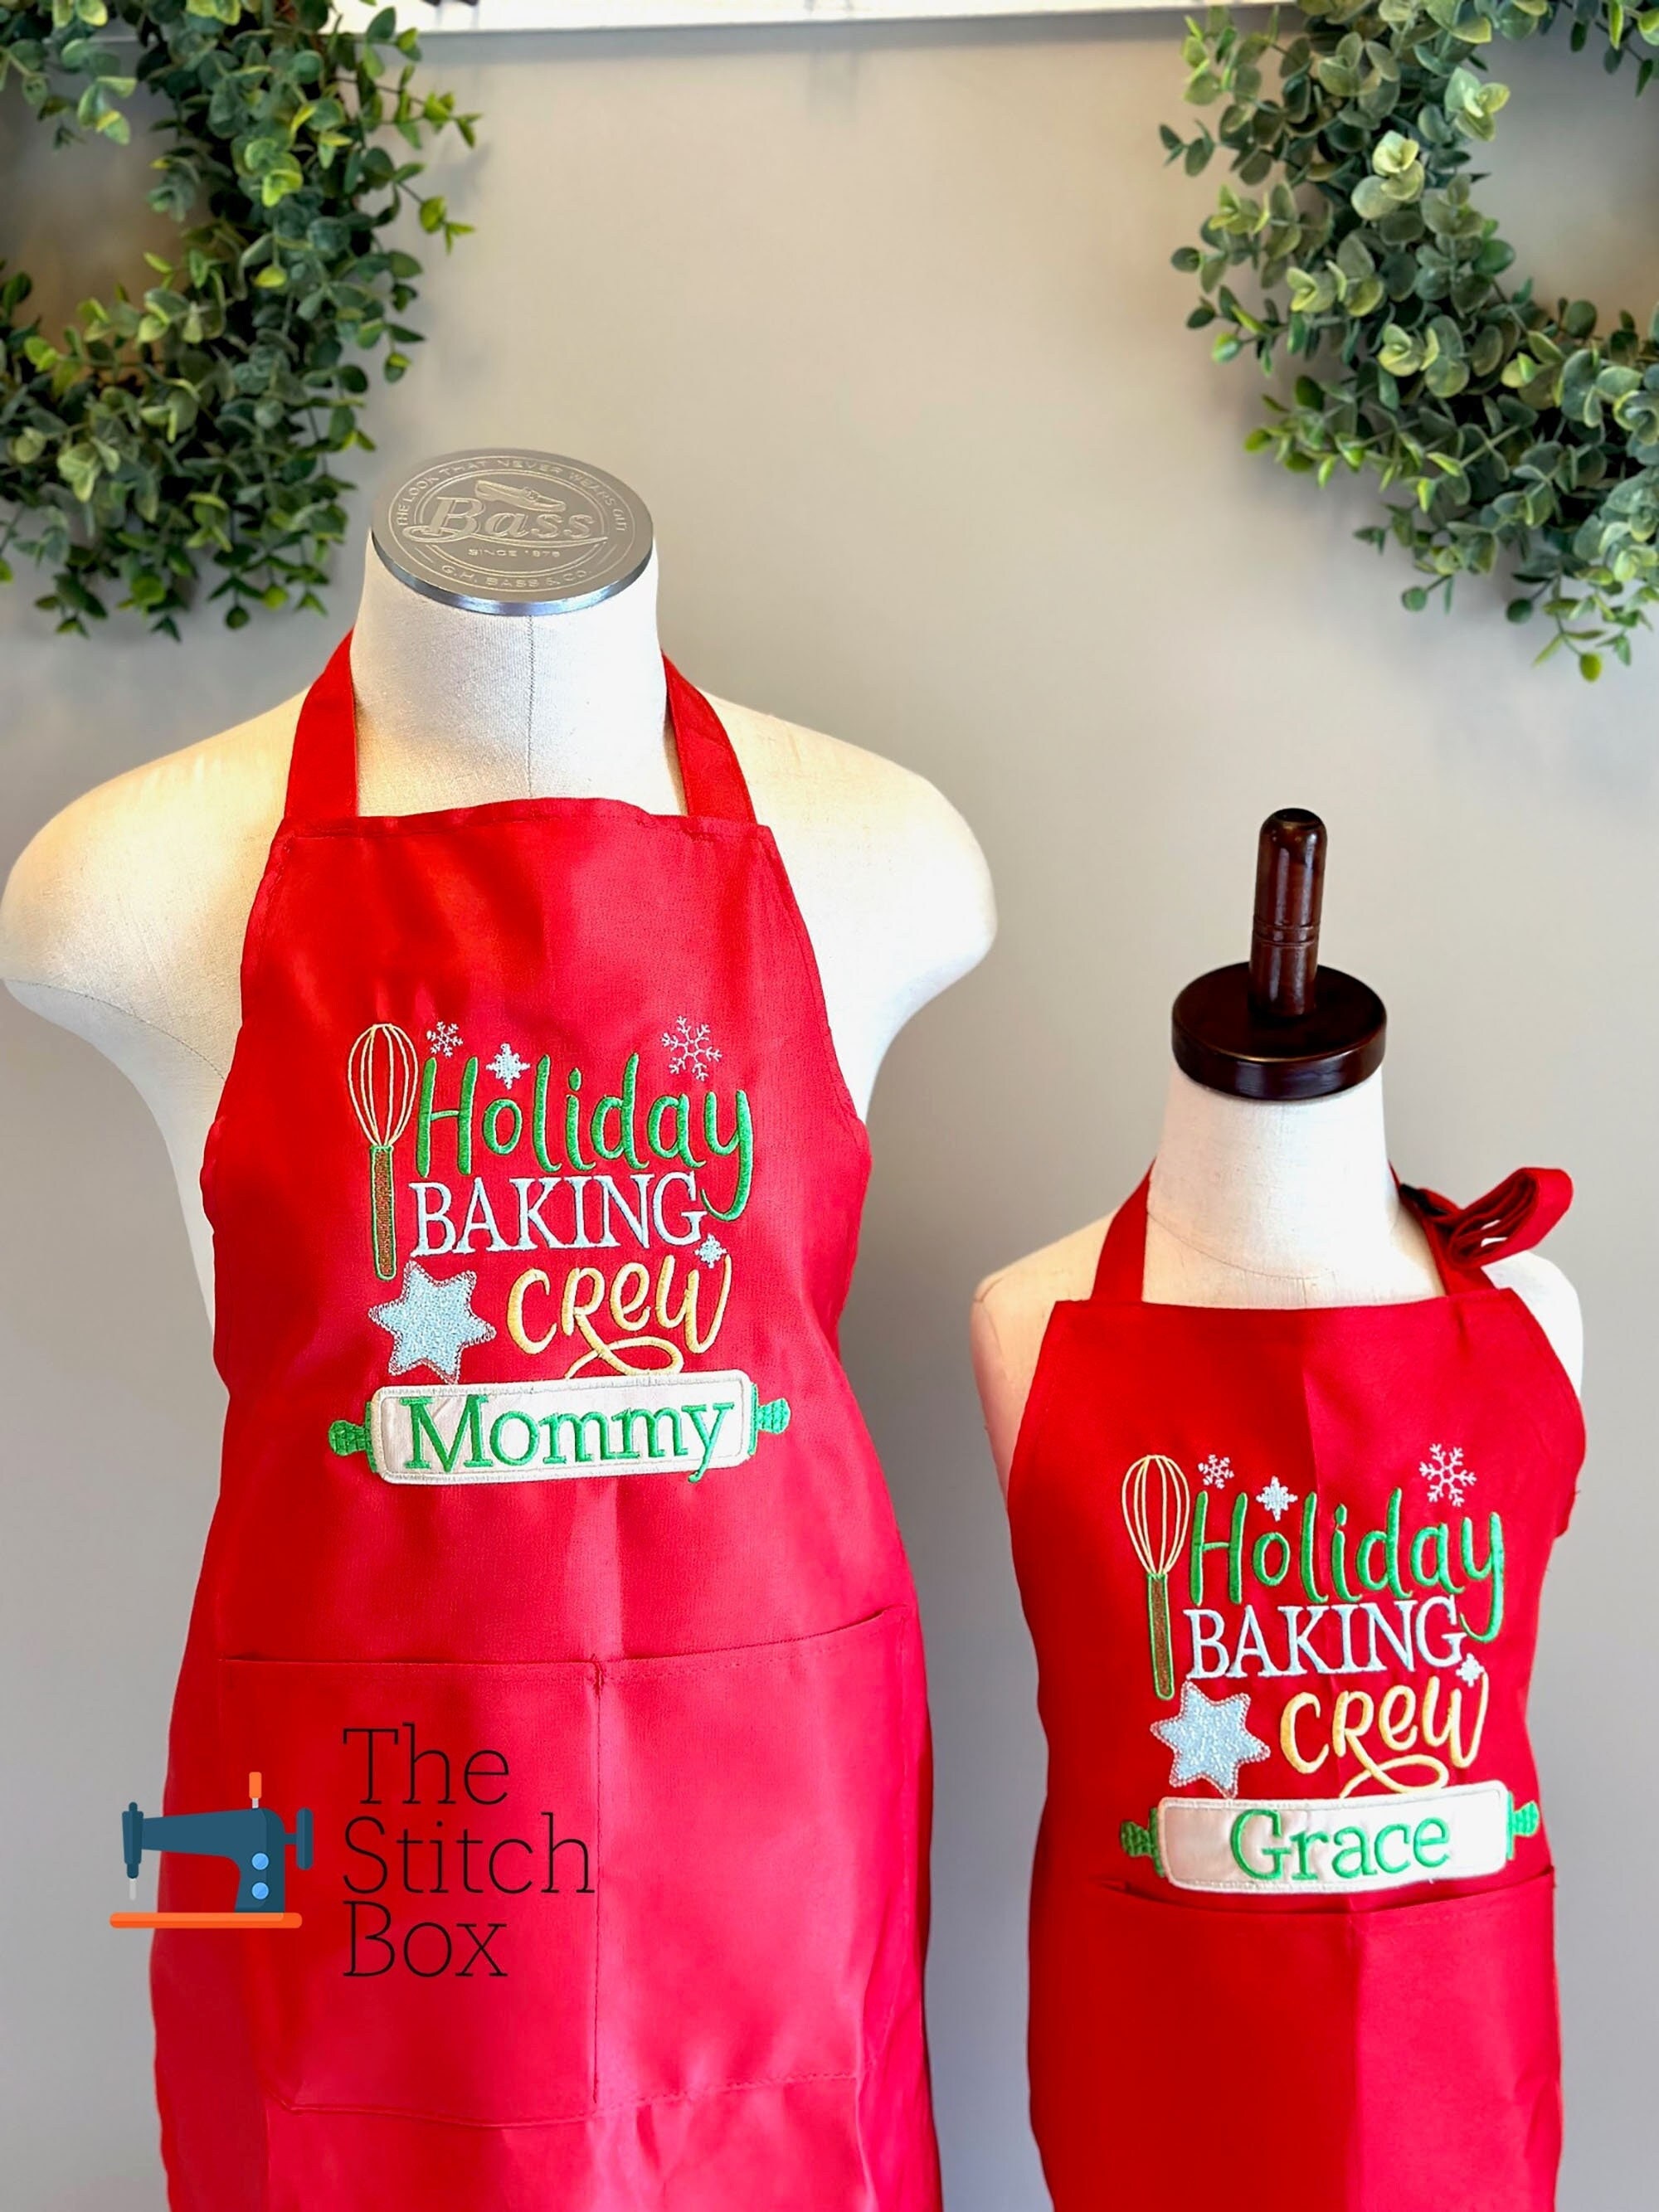 mommy and me matching aprons – emajen